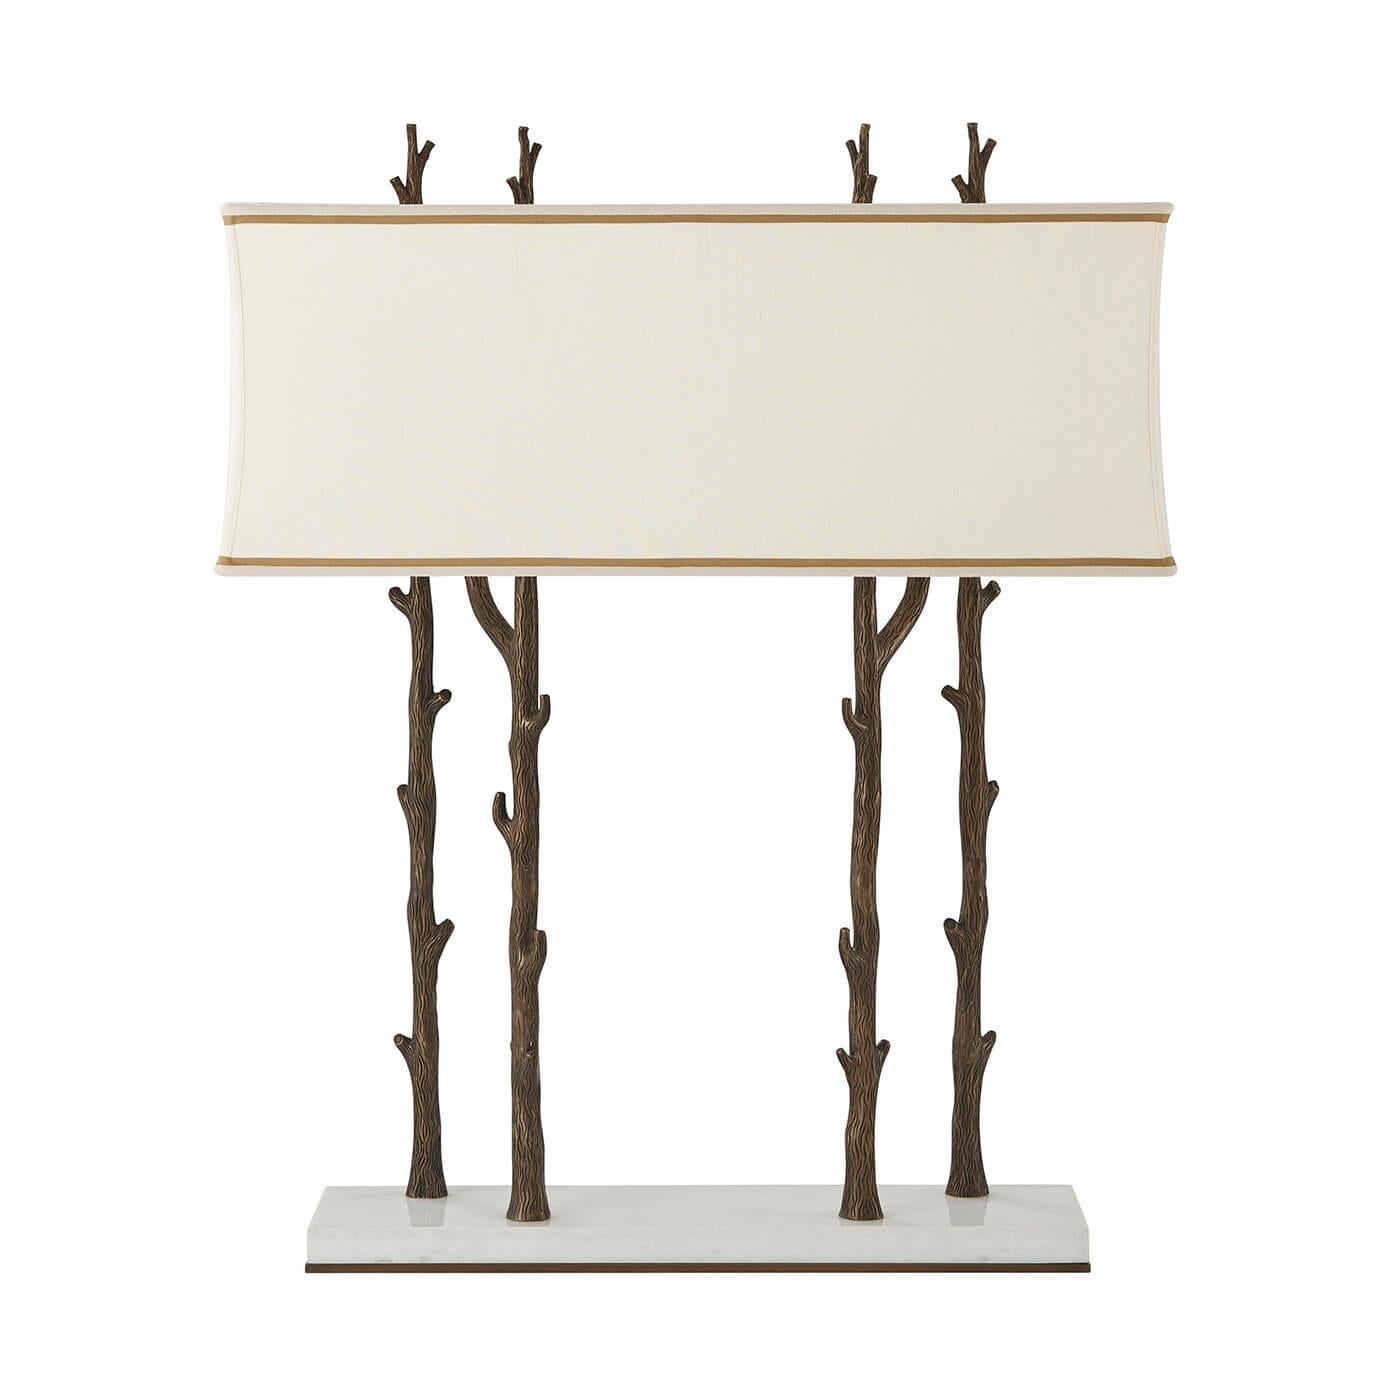 A faux bois brass table lamp, the fine white marble base with four faux bois tree trunks supporting the elongated rectangular shade enclosing all four trees, surmounted by branch finials.

Dimensions: 26